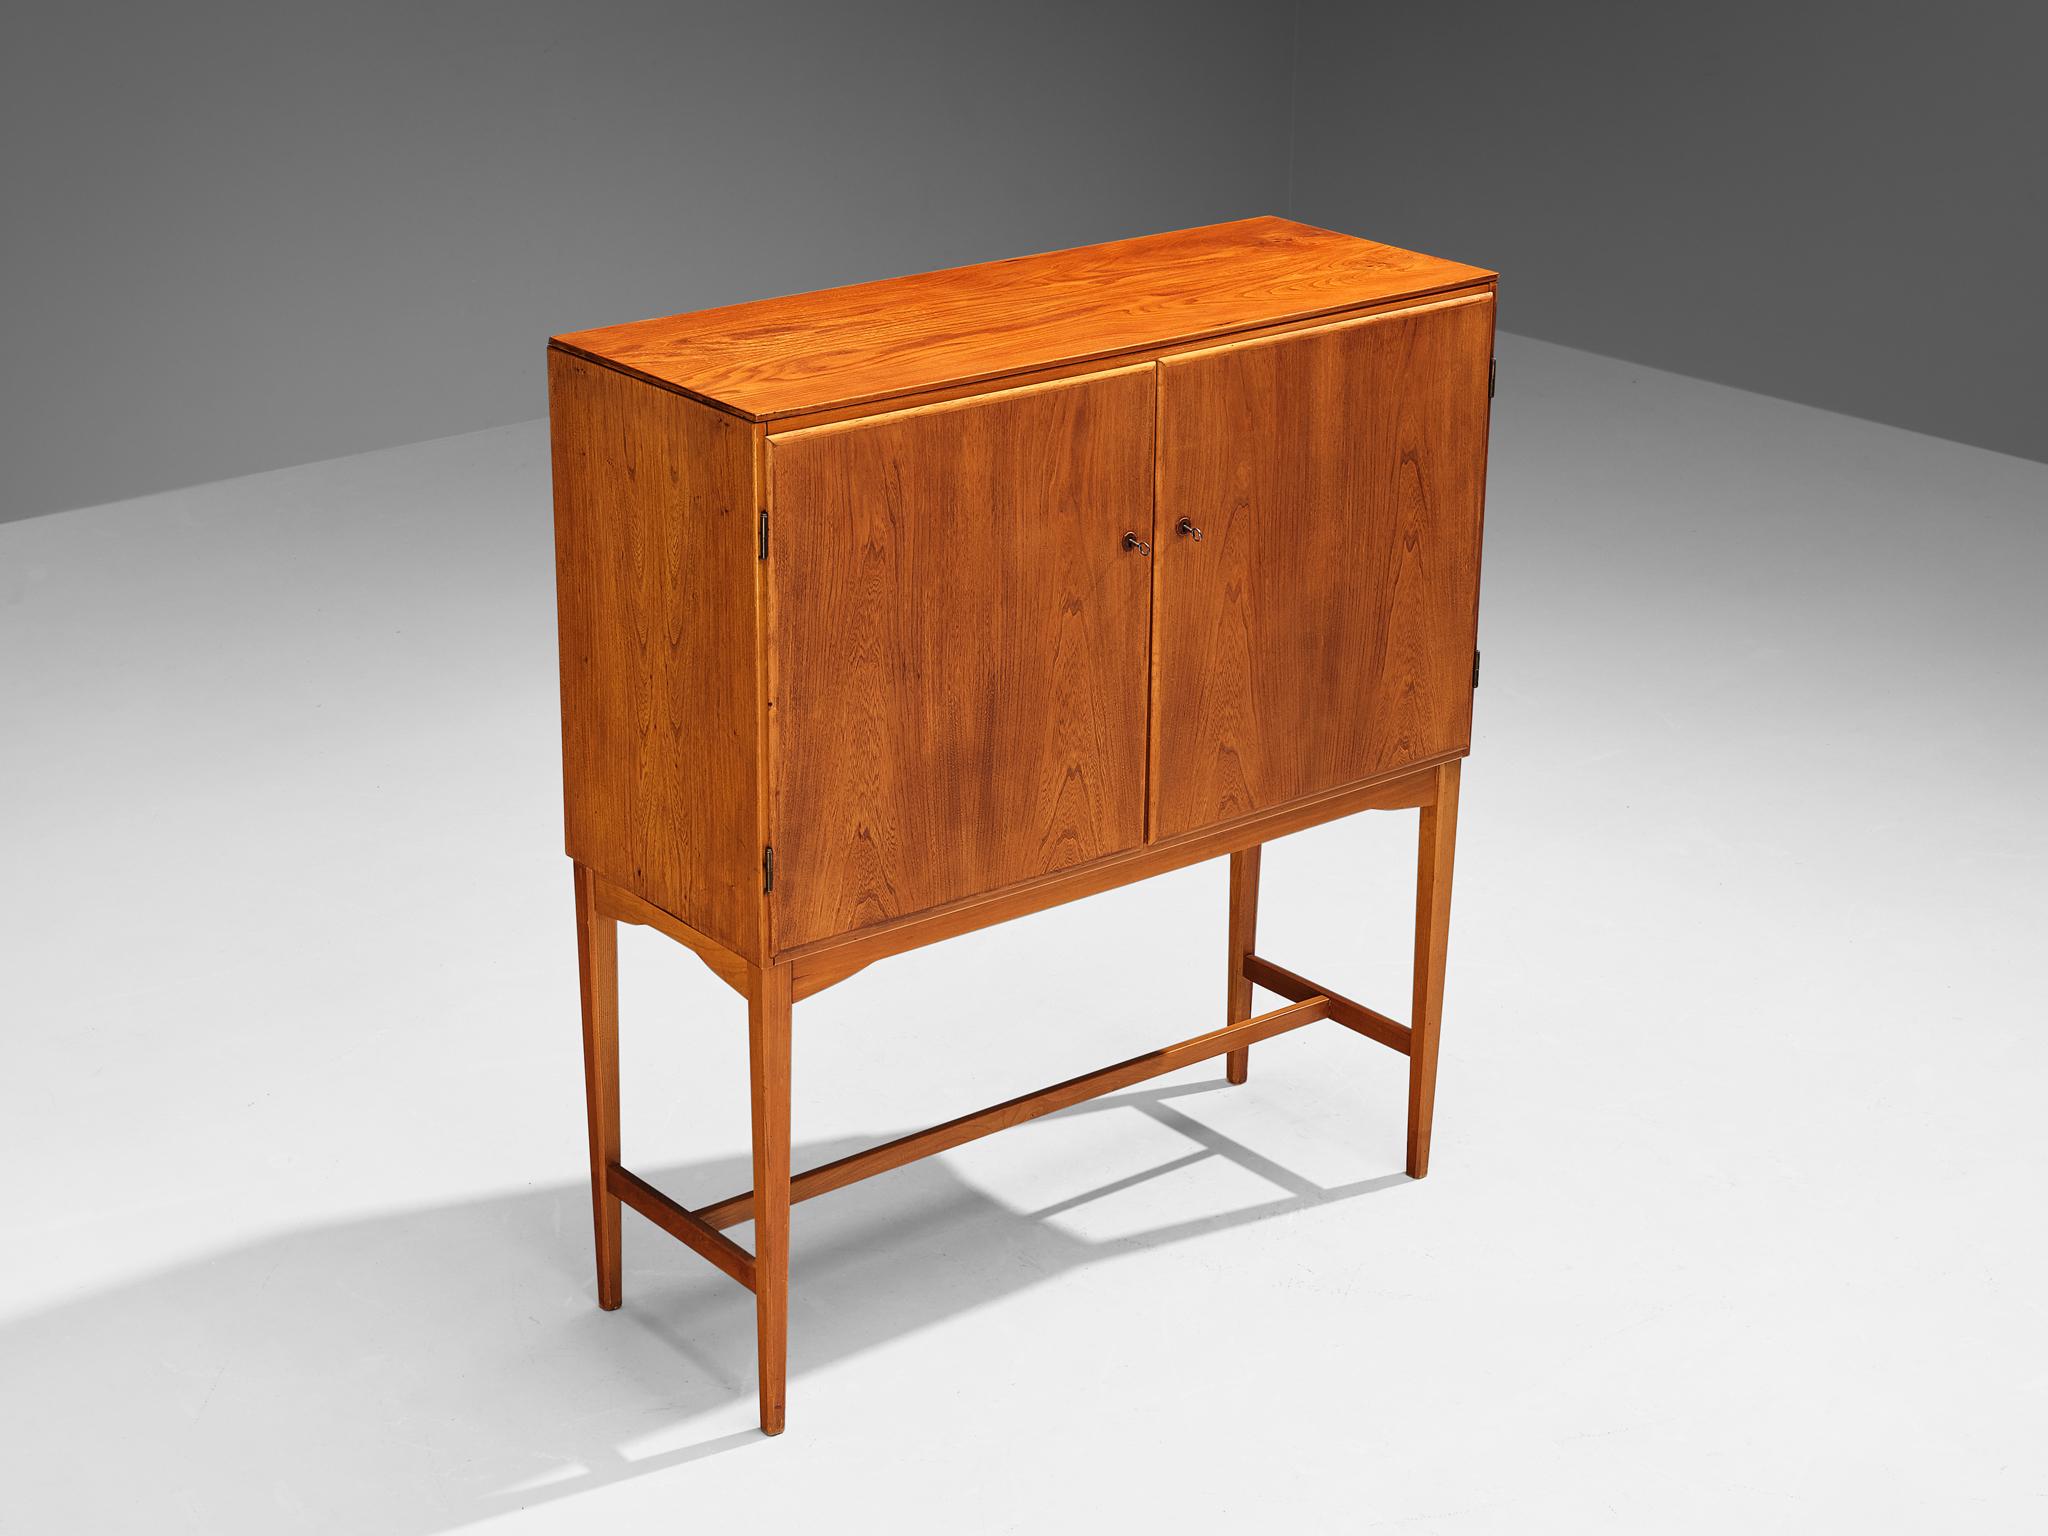 Cabinet, teak, beech, Denmark, late 1940s. 

Excellent Danish cabinet executed in beautiful teak that shows a dynamic grain pattern. An open exterior is realised with the ‘cabinet-on-stand’ feature that is based on English and Asian cabinets